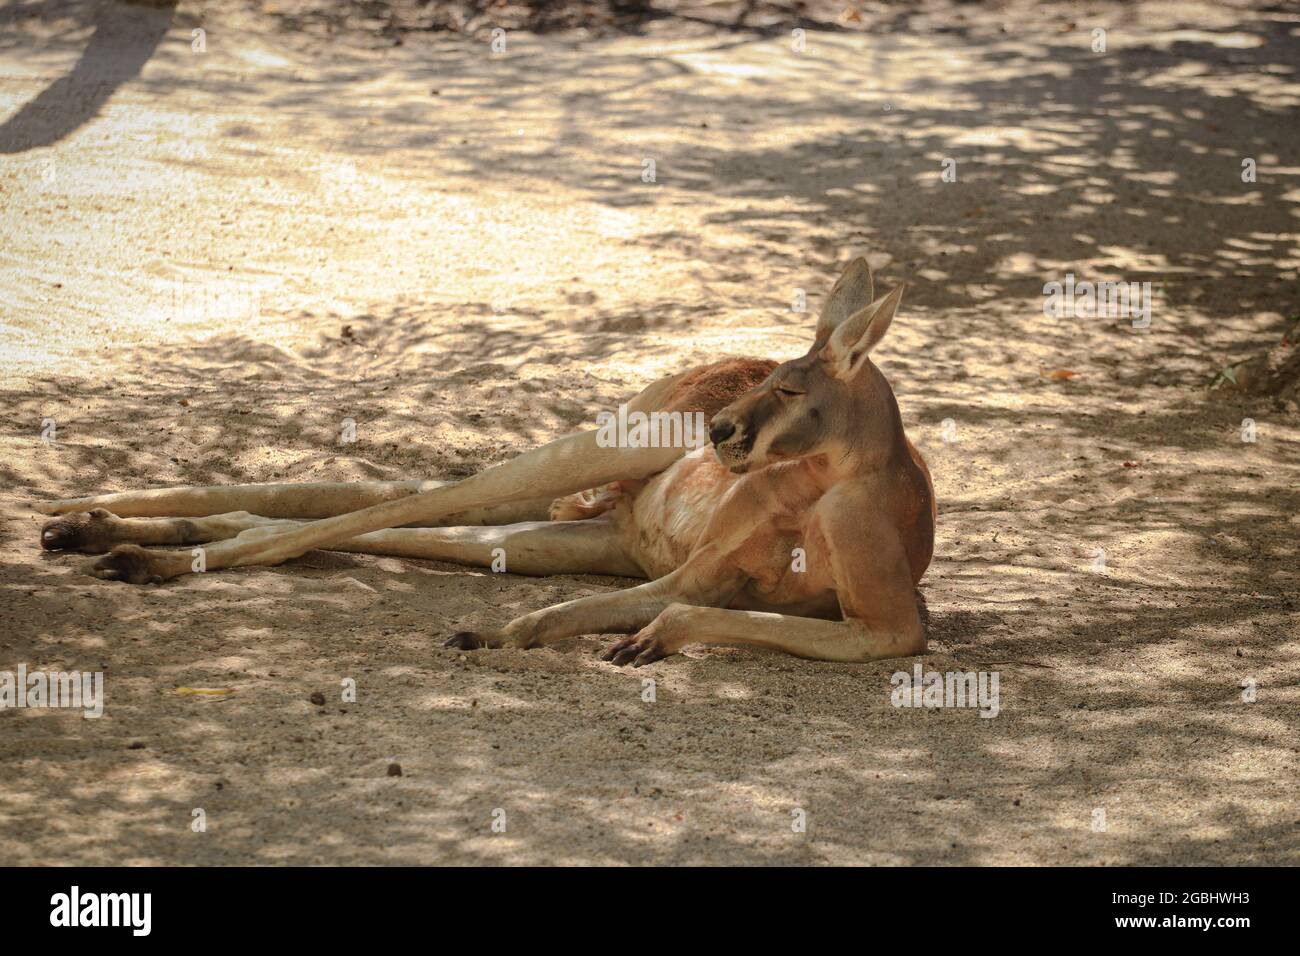 Big red kangaroo resting under the shade of a tree Stock Photo